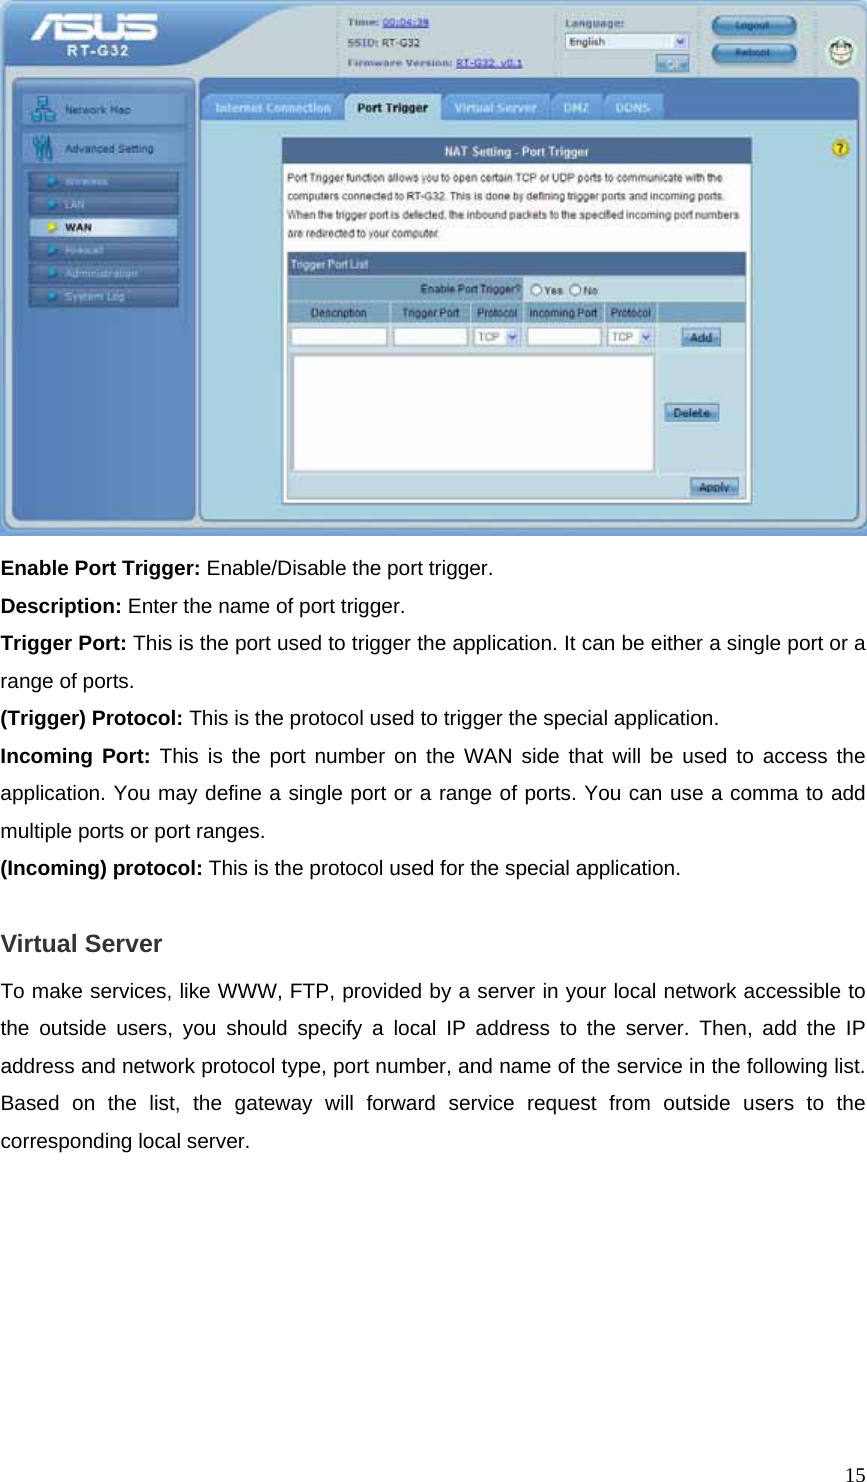  15 Enable Port Trigger: Enable/Disable the port trigger. Description: Enter the name of port trigger. Trigger Port: This is the port used to trigger the application. It can be either a single port or a range of ports. (Trigger) Protocol: This is the protocol used to trigger the special application. Incoming Port: This is the port number on the WAN side that will be used to access the application. You may define a single port or a range of ports. You can use a comma to add multiple ports or port ranges. (Incoming) protocol: This is the protocol used for the special application.  Virtual Server To make services, like WWW, FTP, provided by a server in your local network accessible to the outside users, you should specify a local IP address to the server. Then, add the IP address and network protocol type, port number, and name of the service in the following list. Based on the list, the gateway will forward service request from outside users to the corresponding local server.   